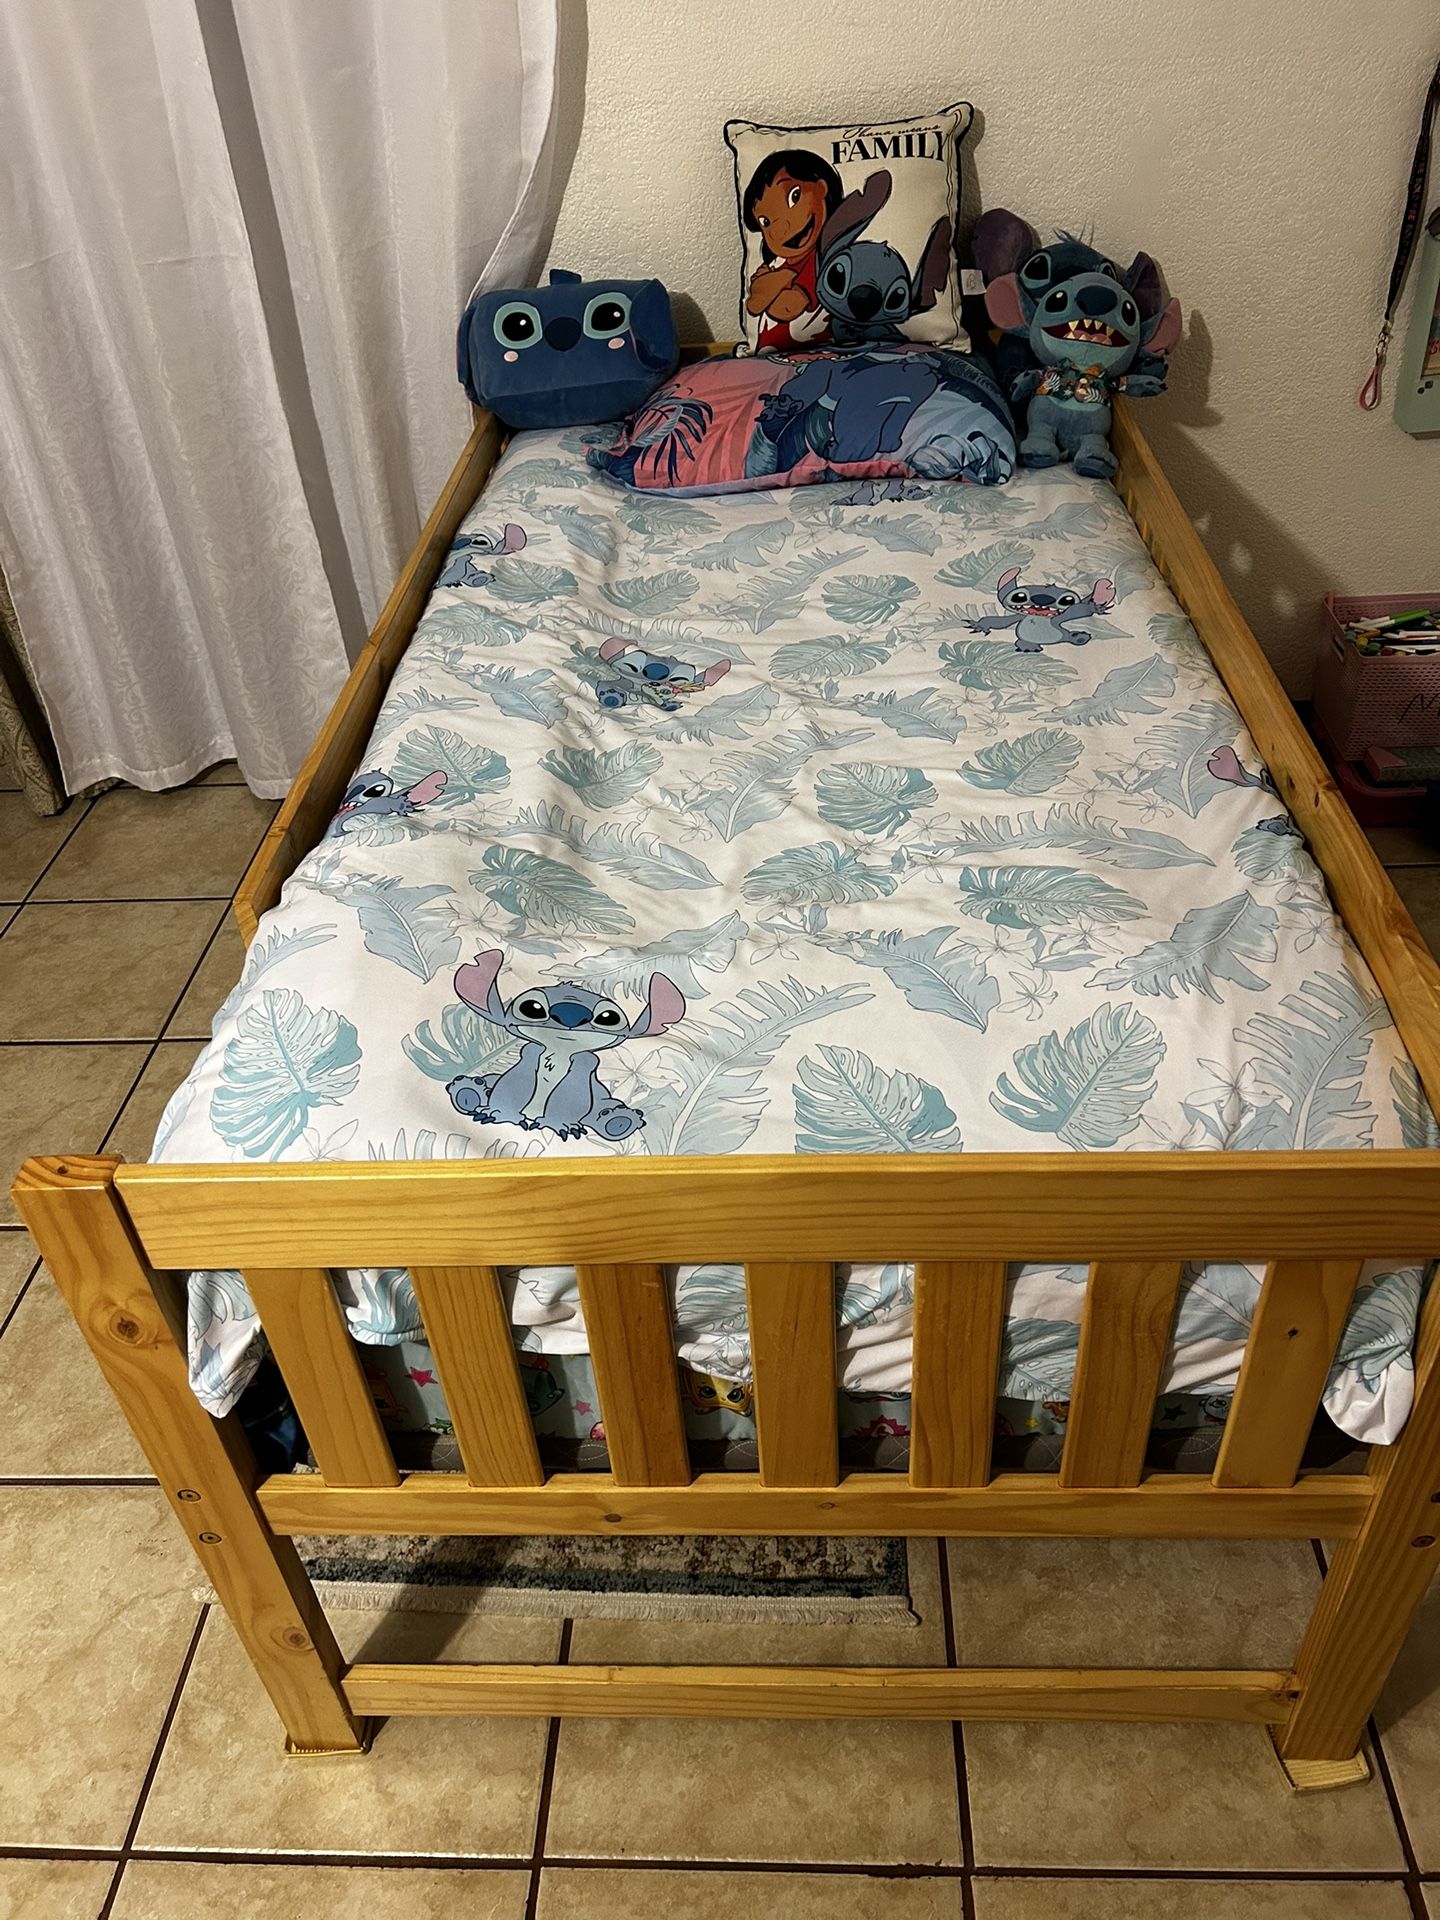 Bunk Bed For Sale